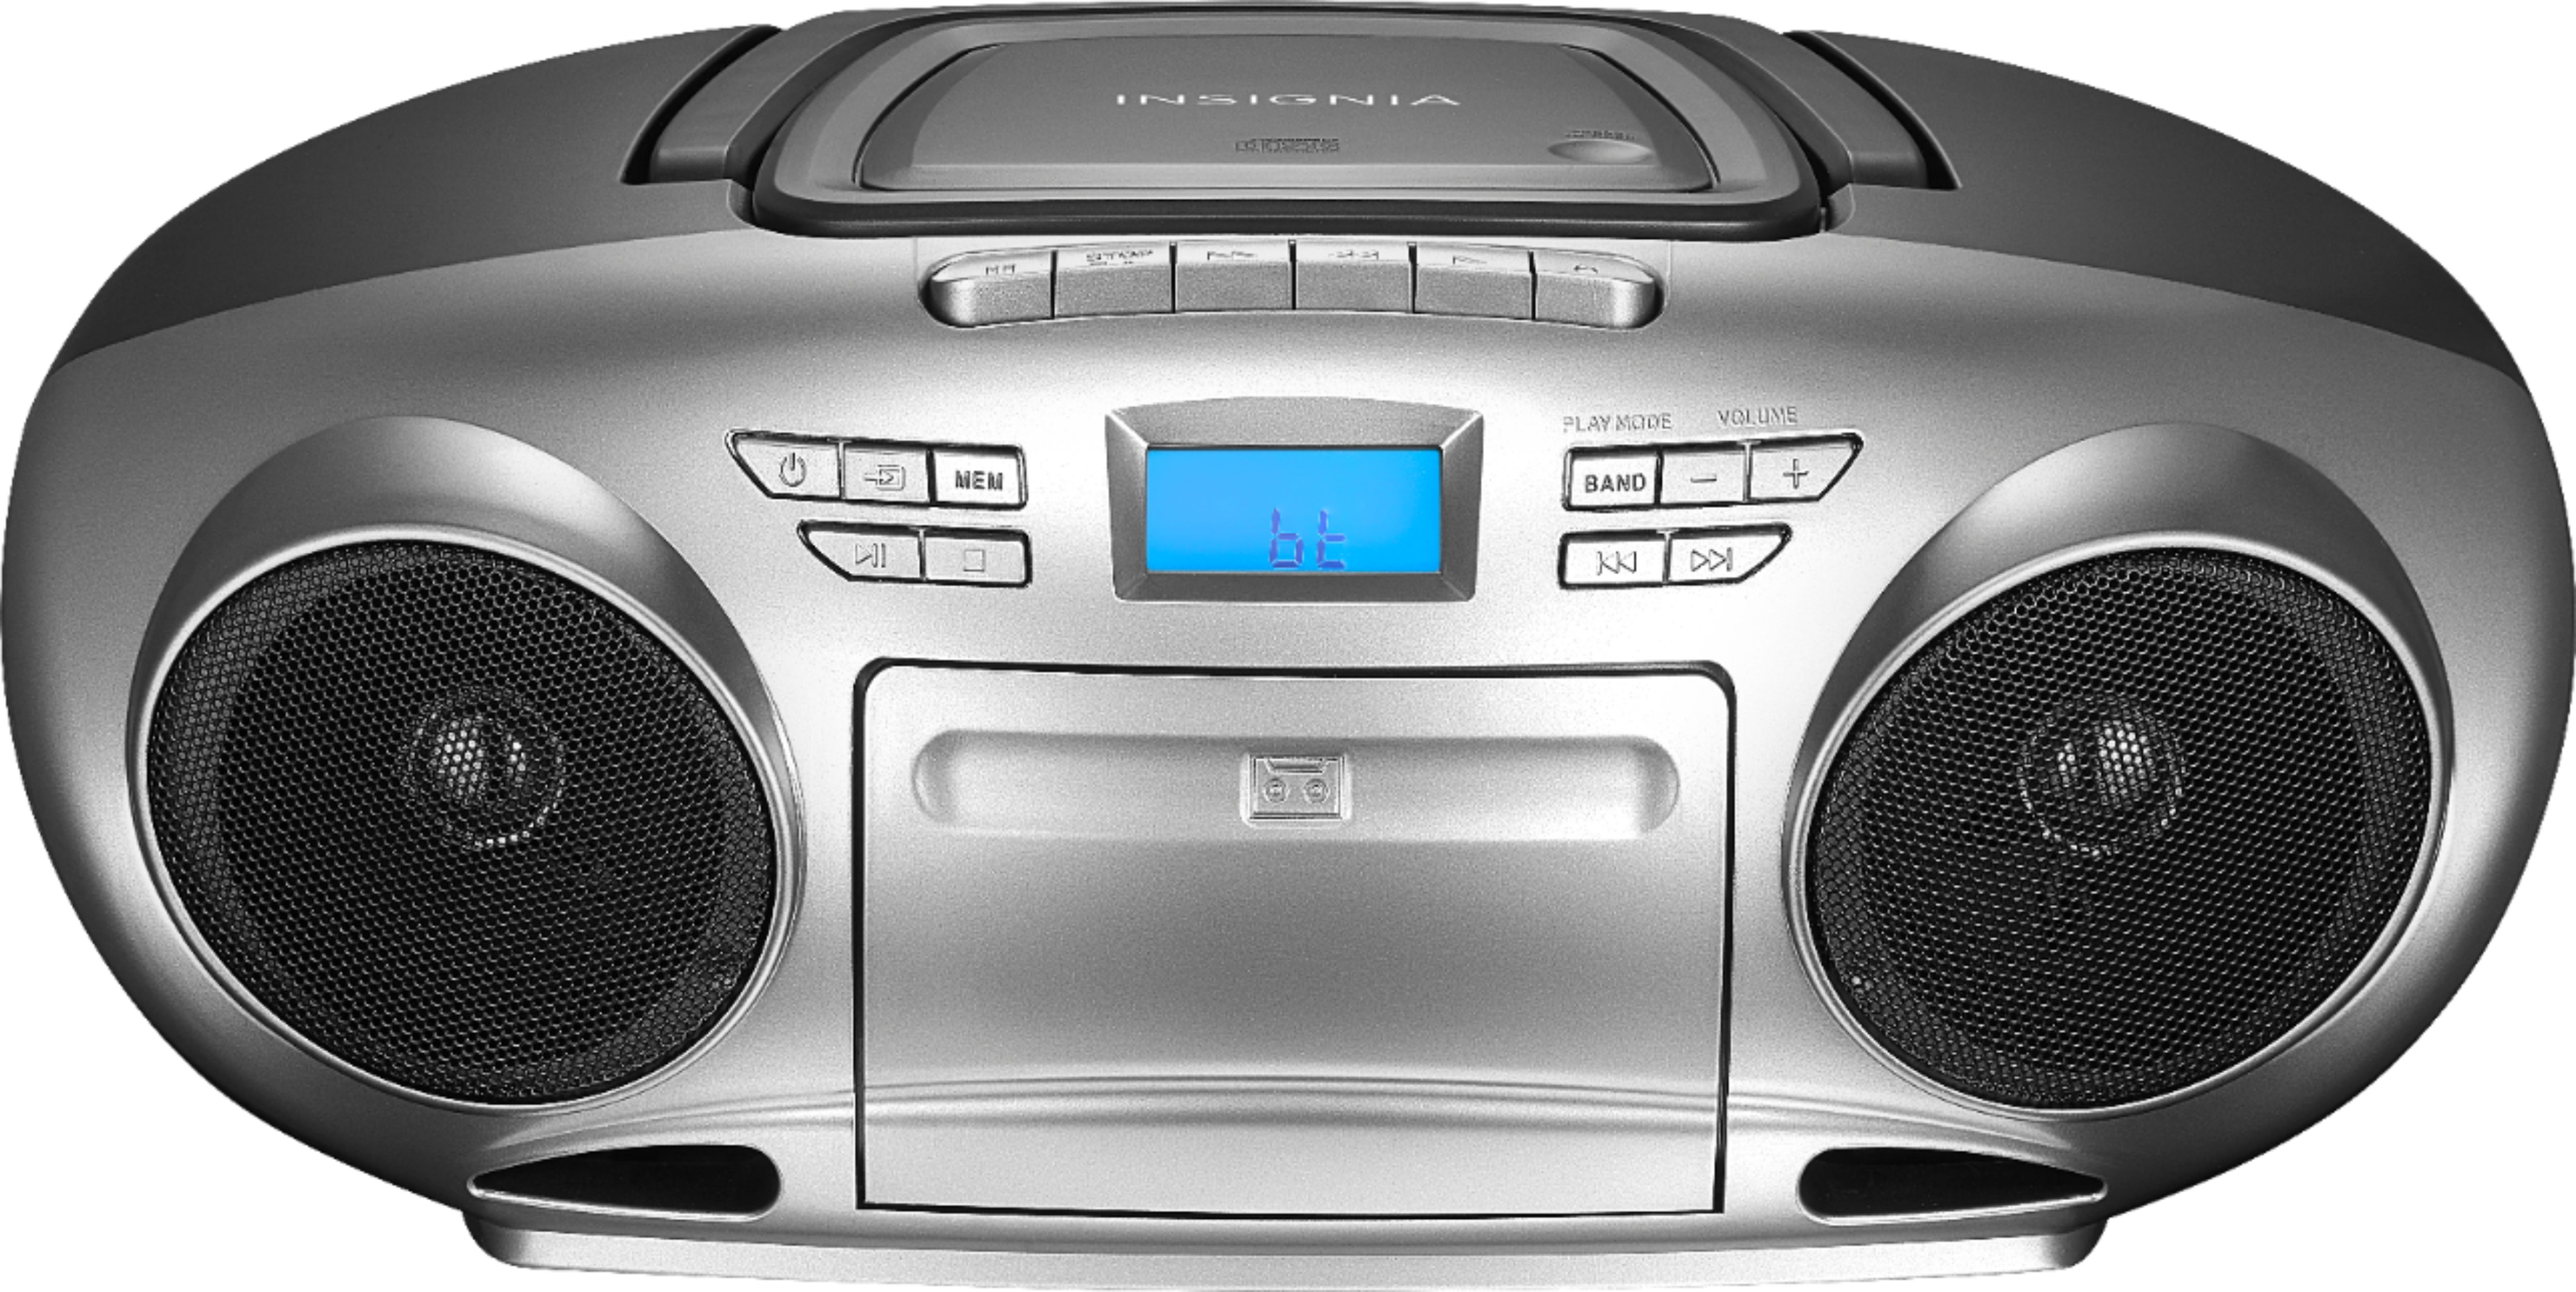 Editor ajo Habitual Insignia™ AM/FM Radio Portable CD Boombox with Bluetooth Silver/Black  NS-BBBT20 - Best Buy